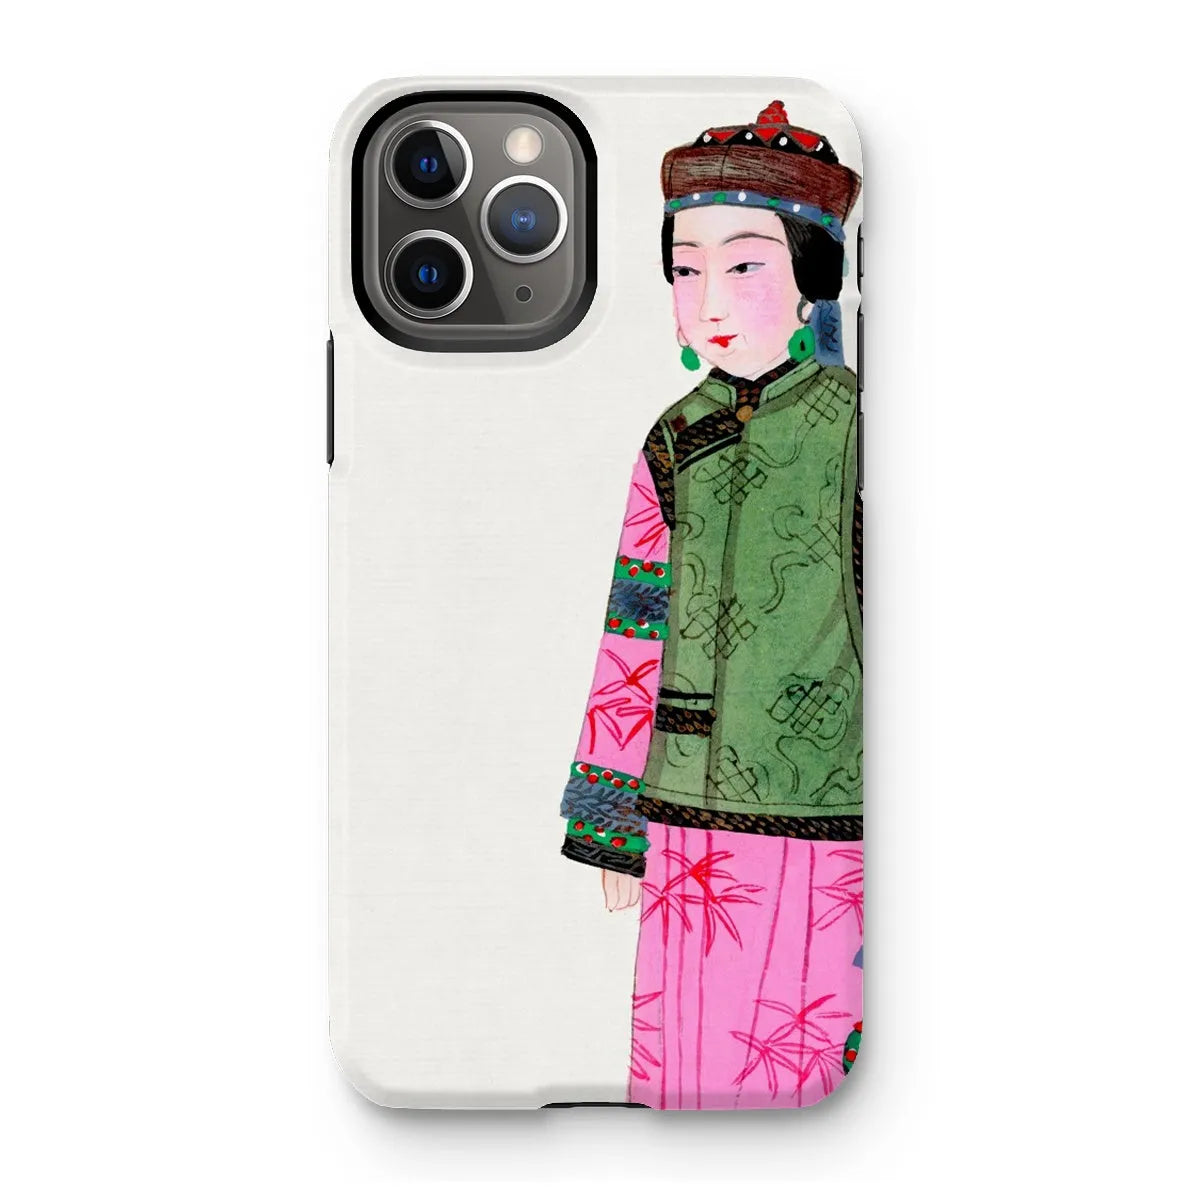 Noblewoman In Winter - Chinese Aesthetic Art Phone Case - Iphone 11 Pro / Matte - Mobile Phone Cases - Aesthetic Art